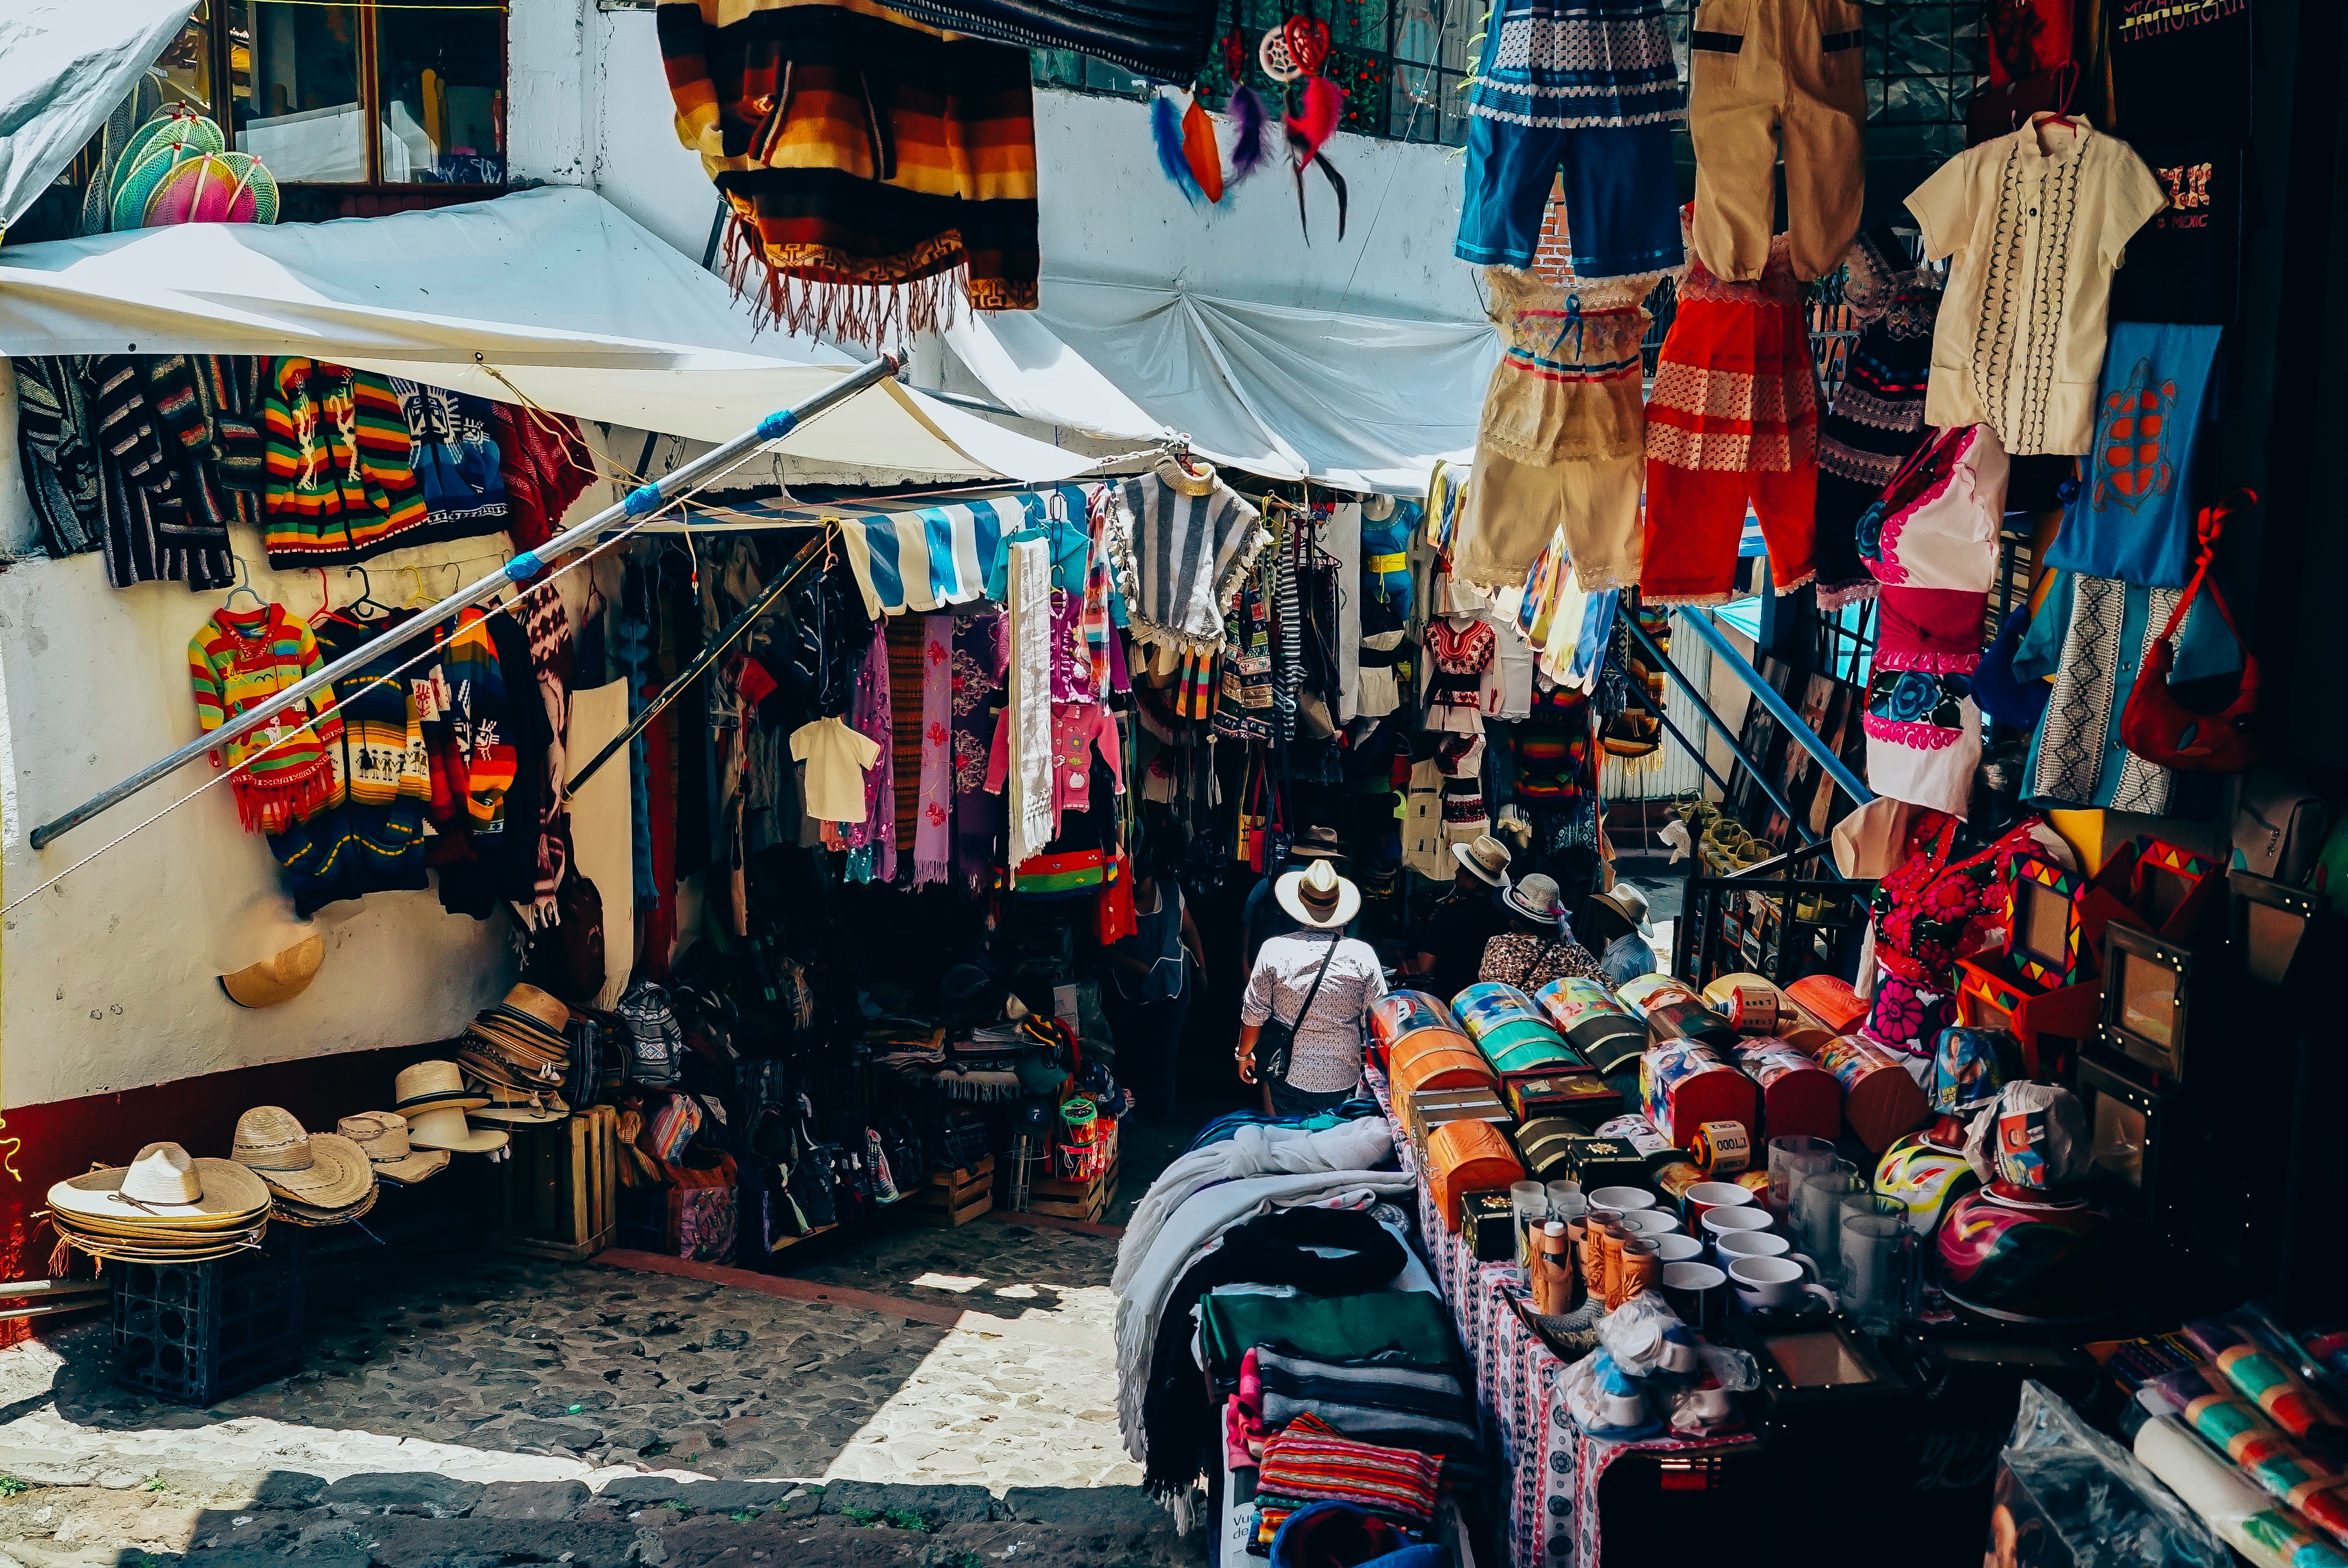 Photo by Ricky Esquivel: https://www.pexels.com/photo/assorted-color-clothes-display-on-street-1745747/